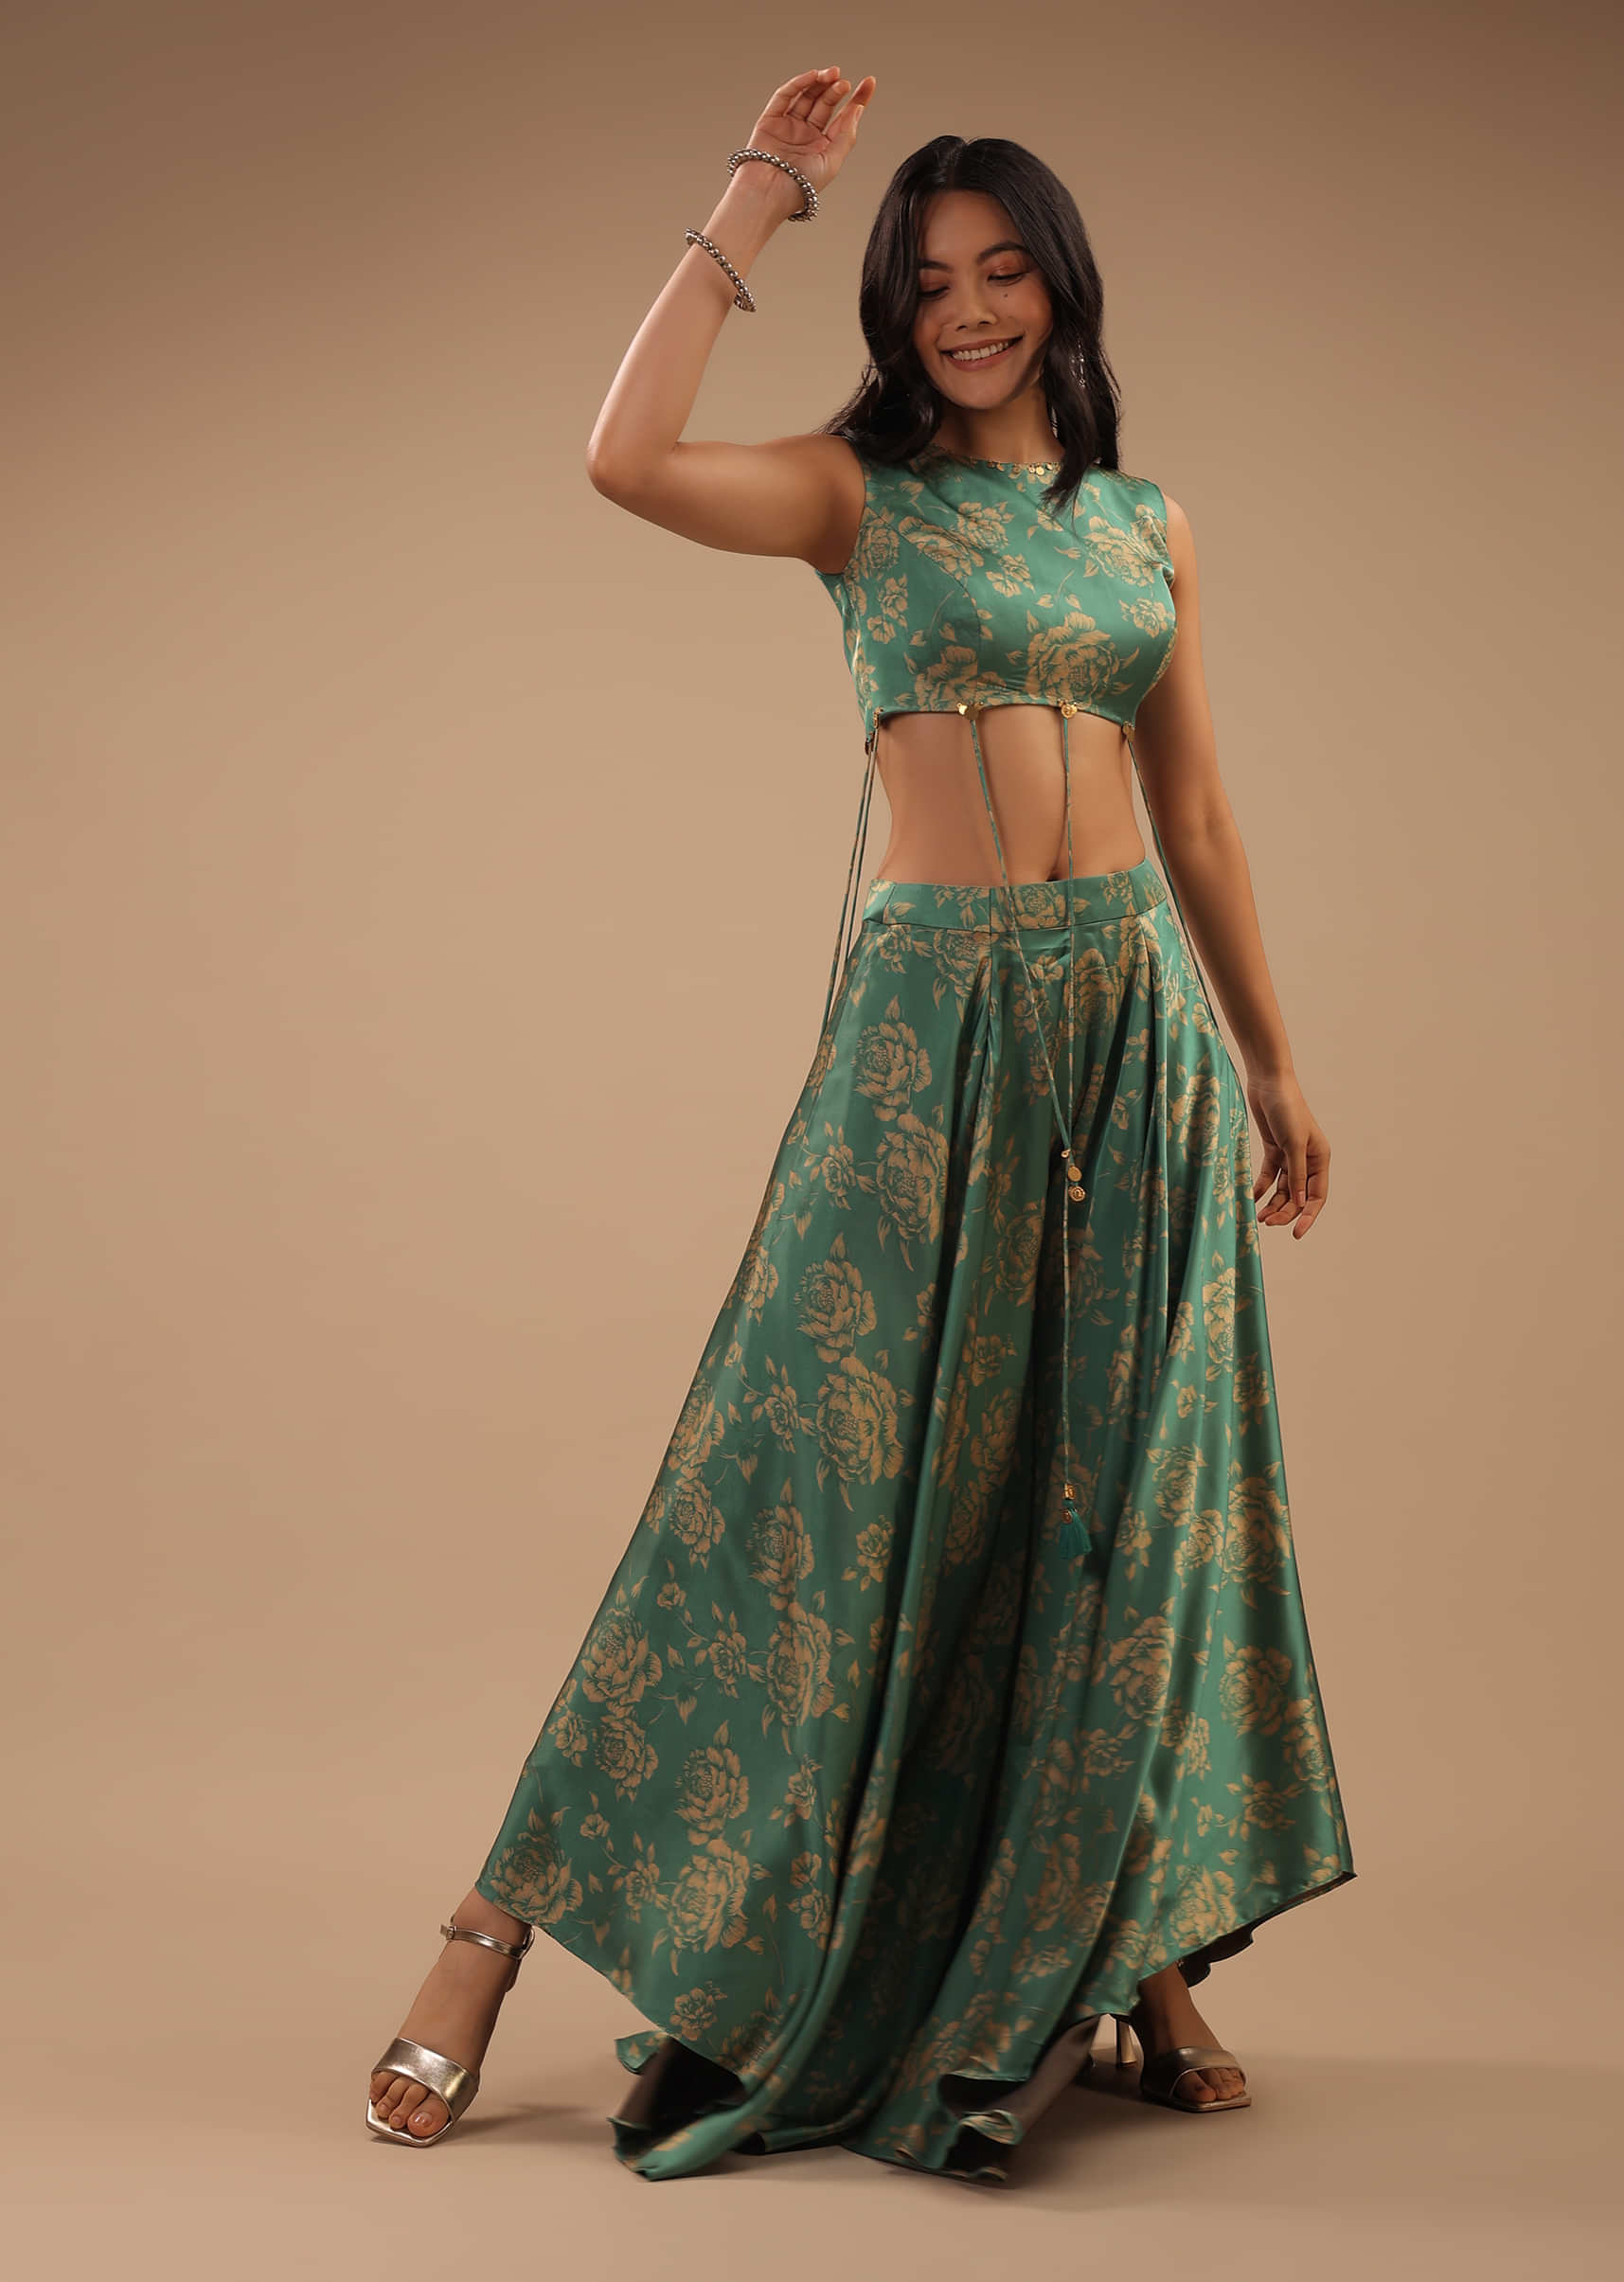 Beryl Green Satin Blouse And Palazzo Pants With Floral Print And Asymmetric Hemline